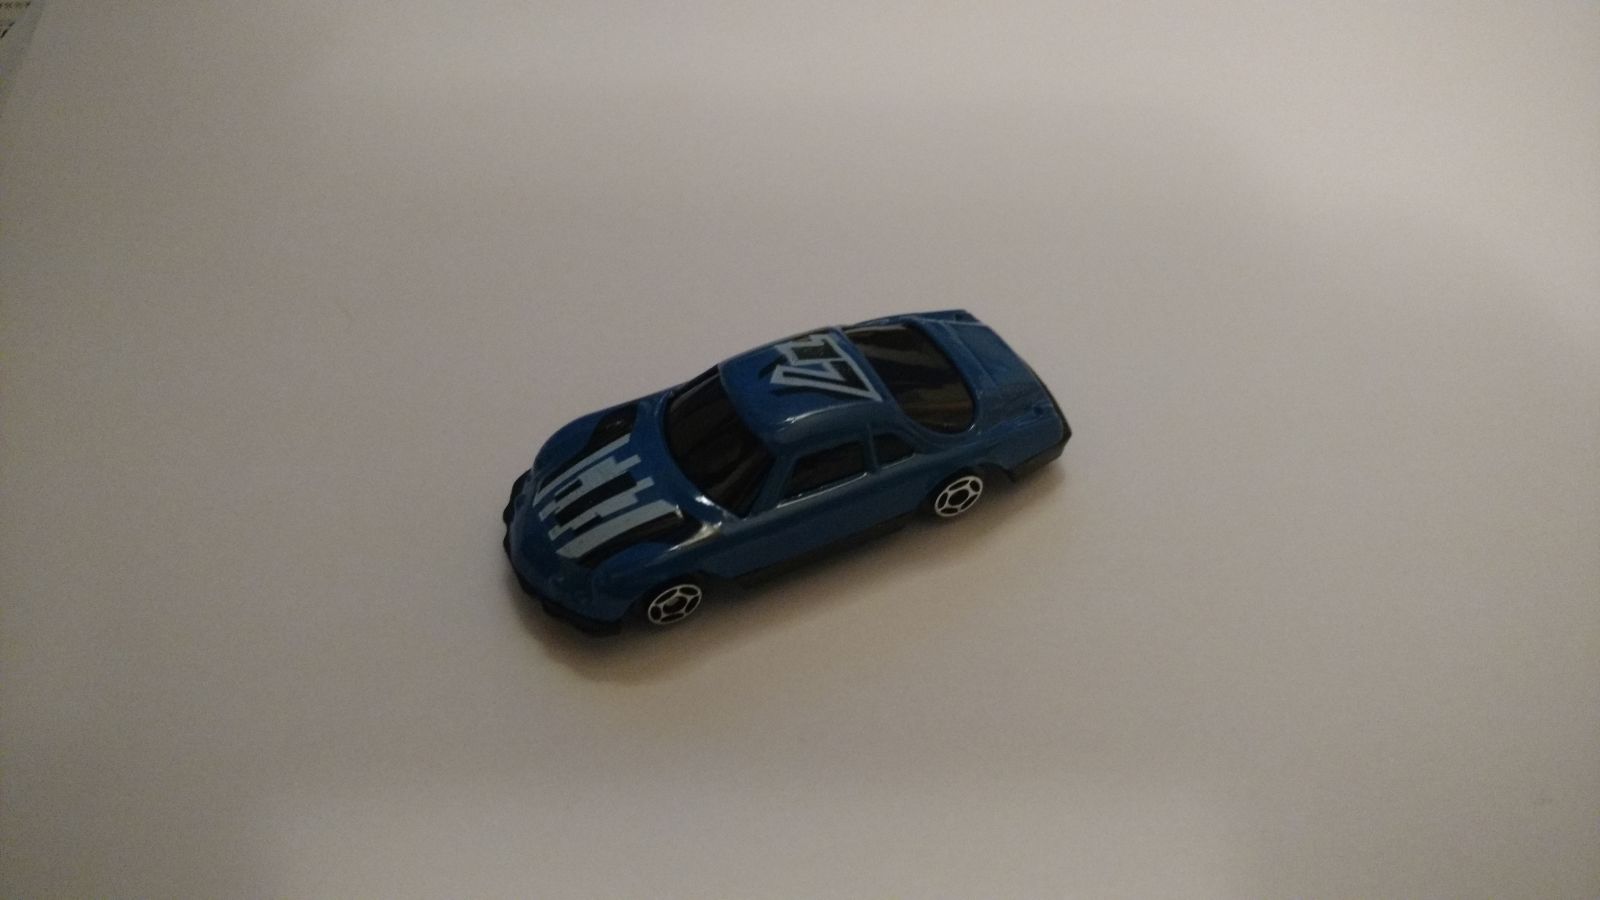 Illustration for article titled Alpine A110 of the Lowest Quality